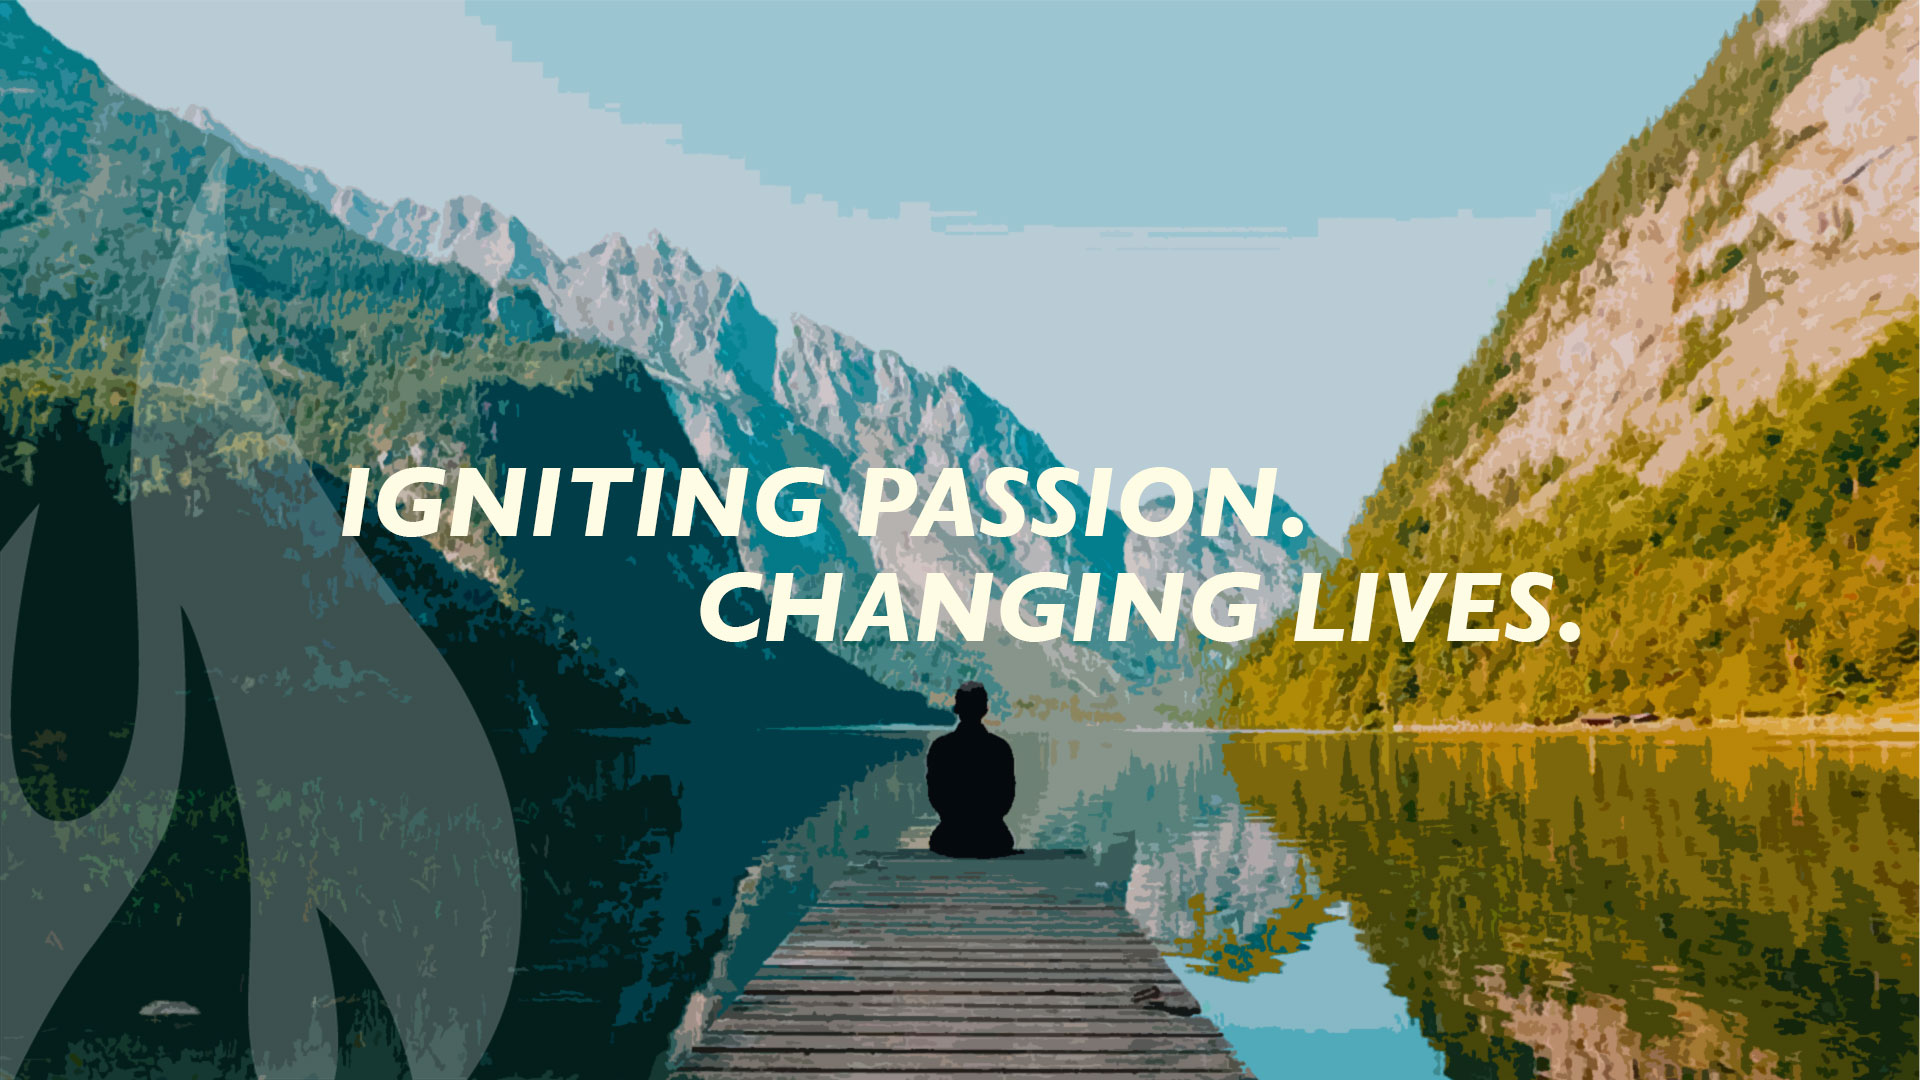 Grow Ignited. Igniting Passion. Changing Lives.